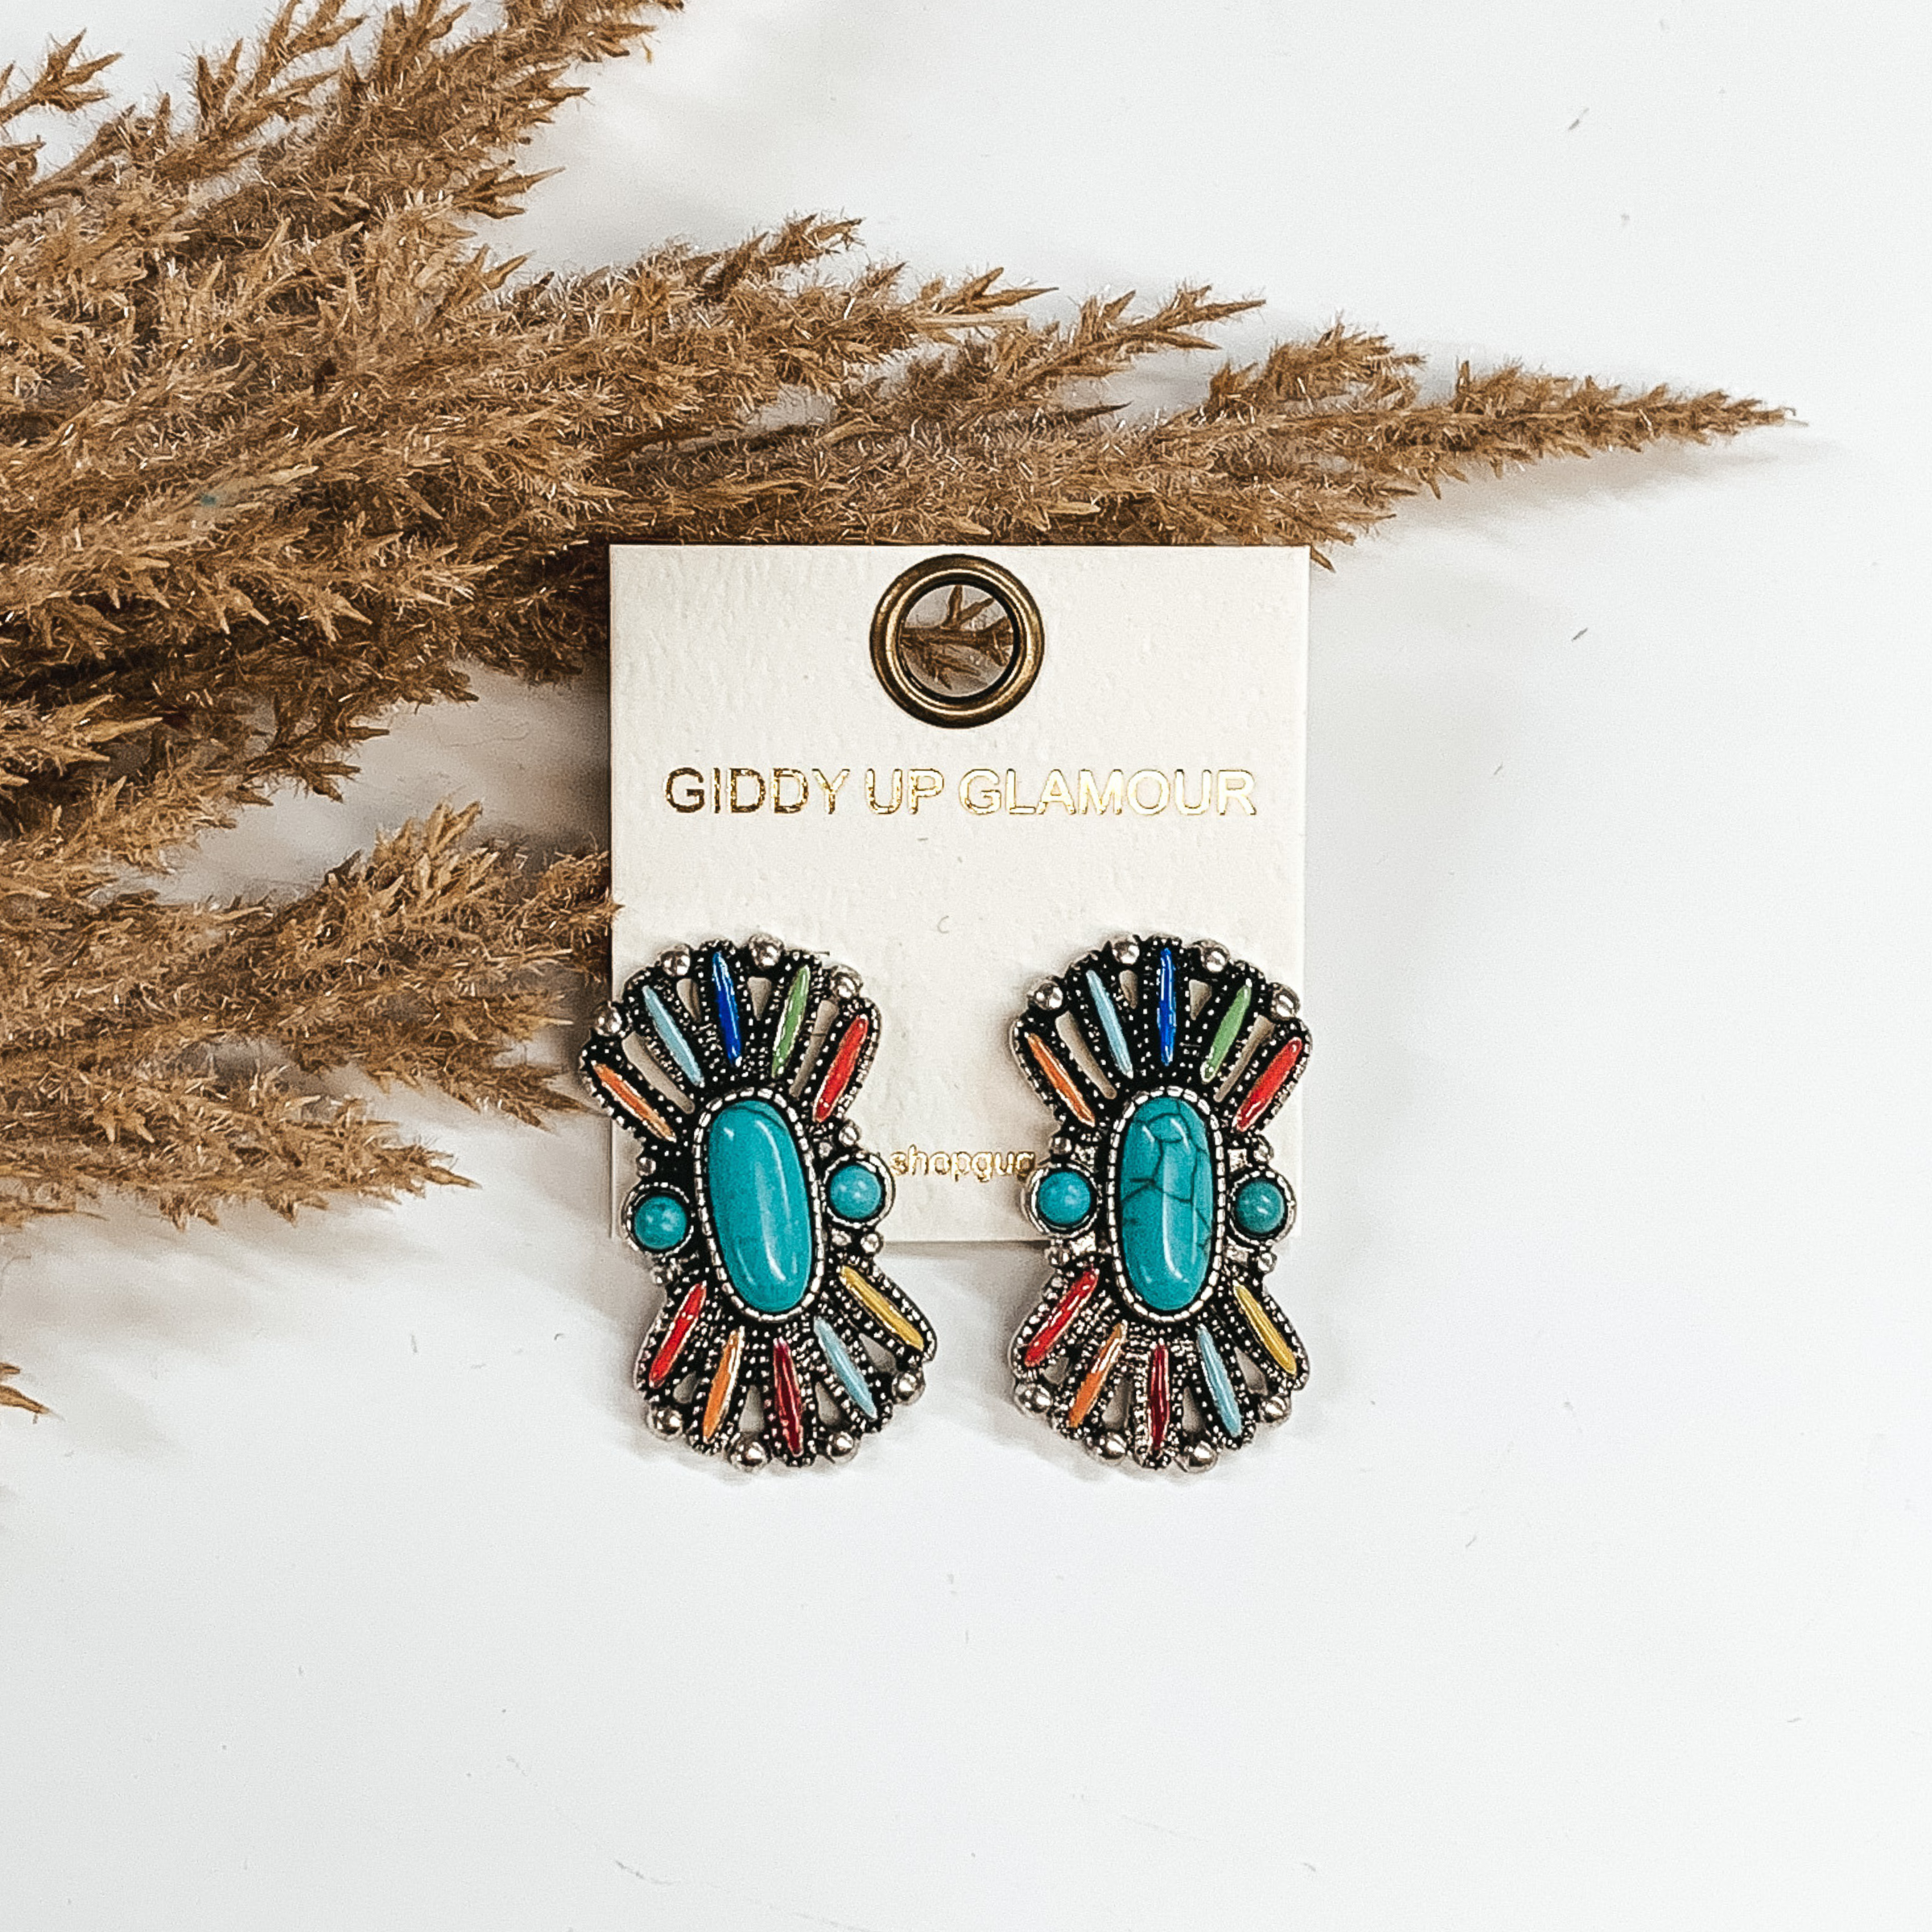 Multicolored Stone Hour-Glass Shaped Earrings in Silver - Giddy Up Glamour Boutique